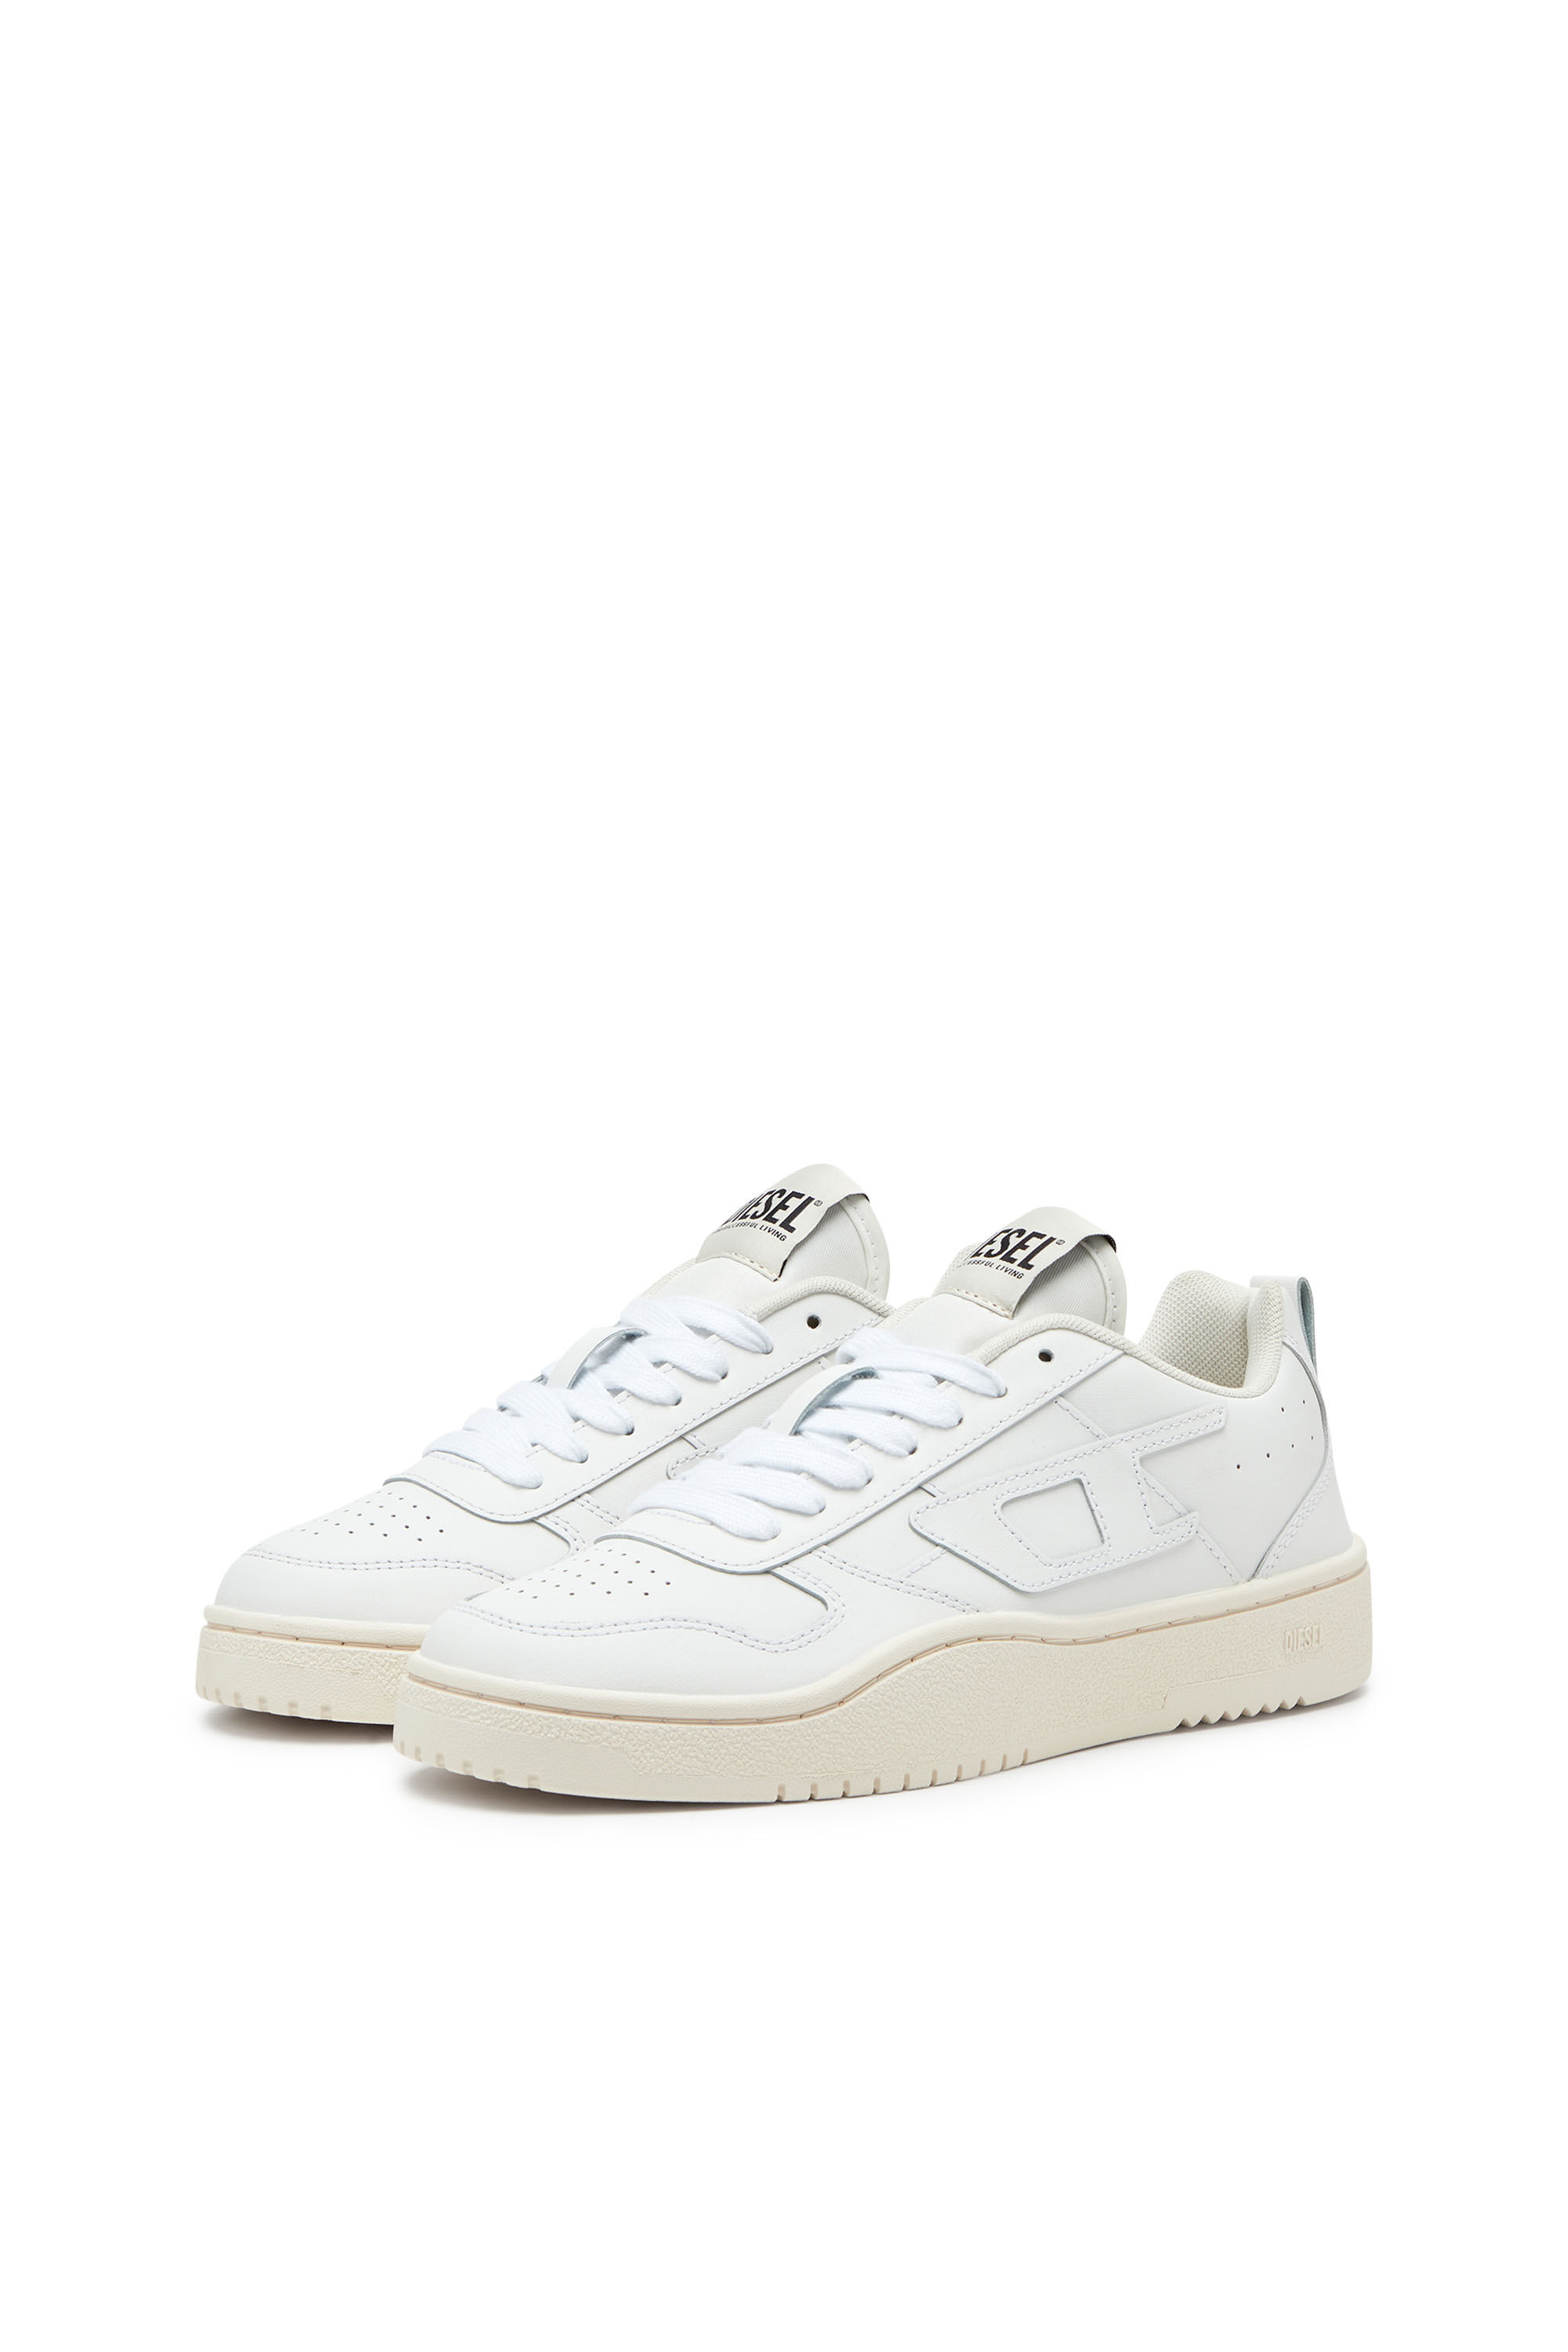 Diesel - S-UKIYO V2 LOW, Man S-Ukiyo Low-Low-top sneakers in leather and nylon in White - Image 8